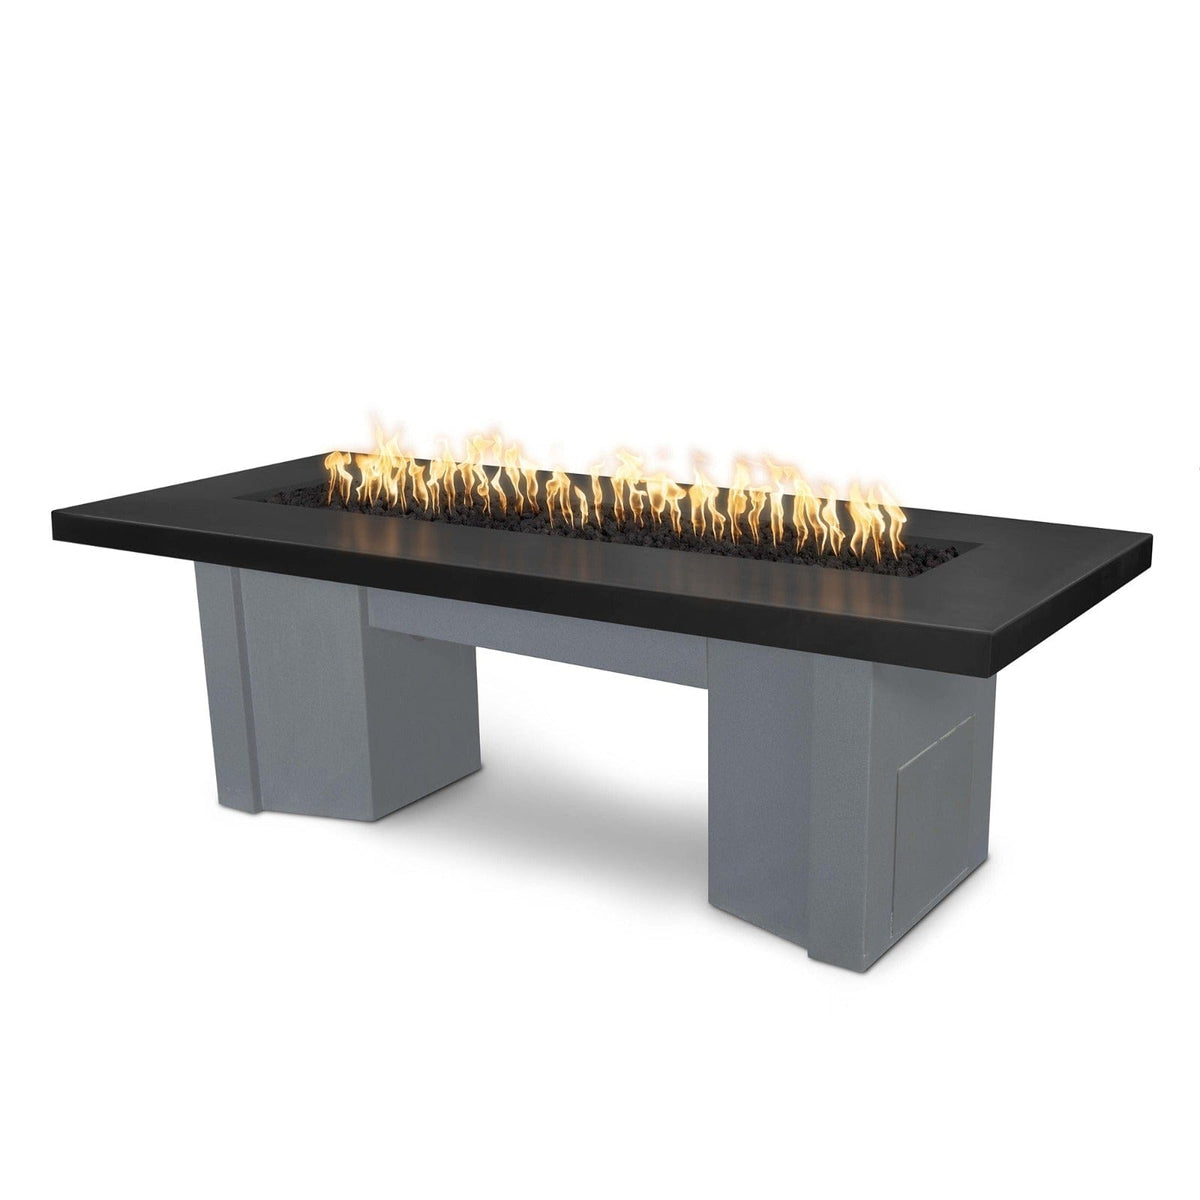 The Outdoor Plus Fire Features Black (-BLK) / Gray Powder Coated Steel (-GRY) The Outdoor Plus 78&quot; Alameda Fire Table Smooth Concrete in Liquid Propane - Flame Sense System with Push Button Spark Igniter / OPT-ALMGFRC78FSEN-LP